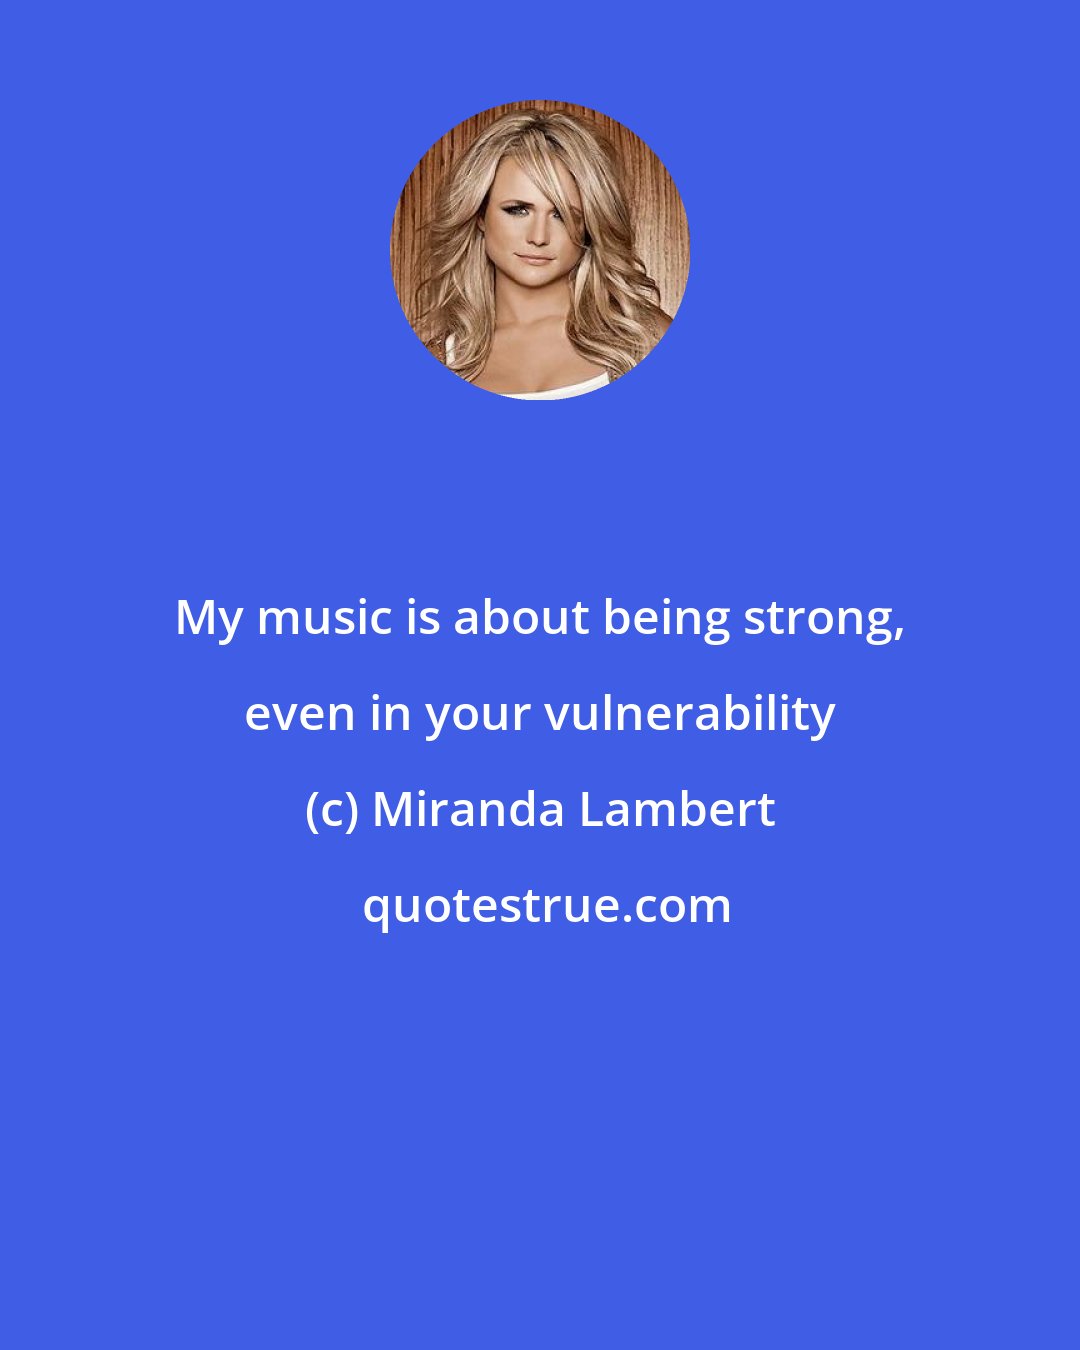 Miranda Lambert: My music is about being strong, even in your vulnerability